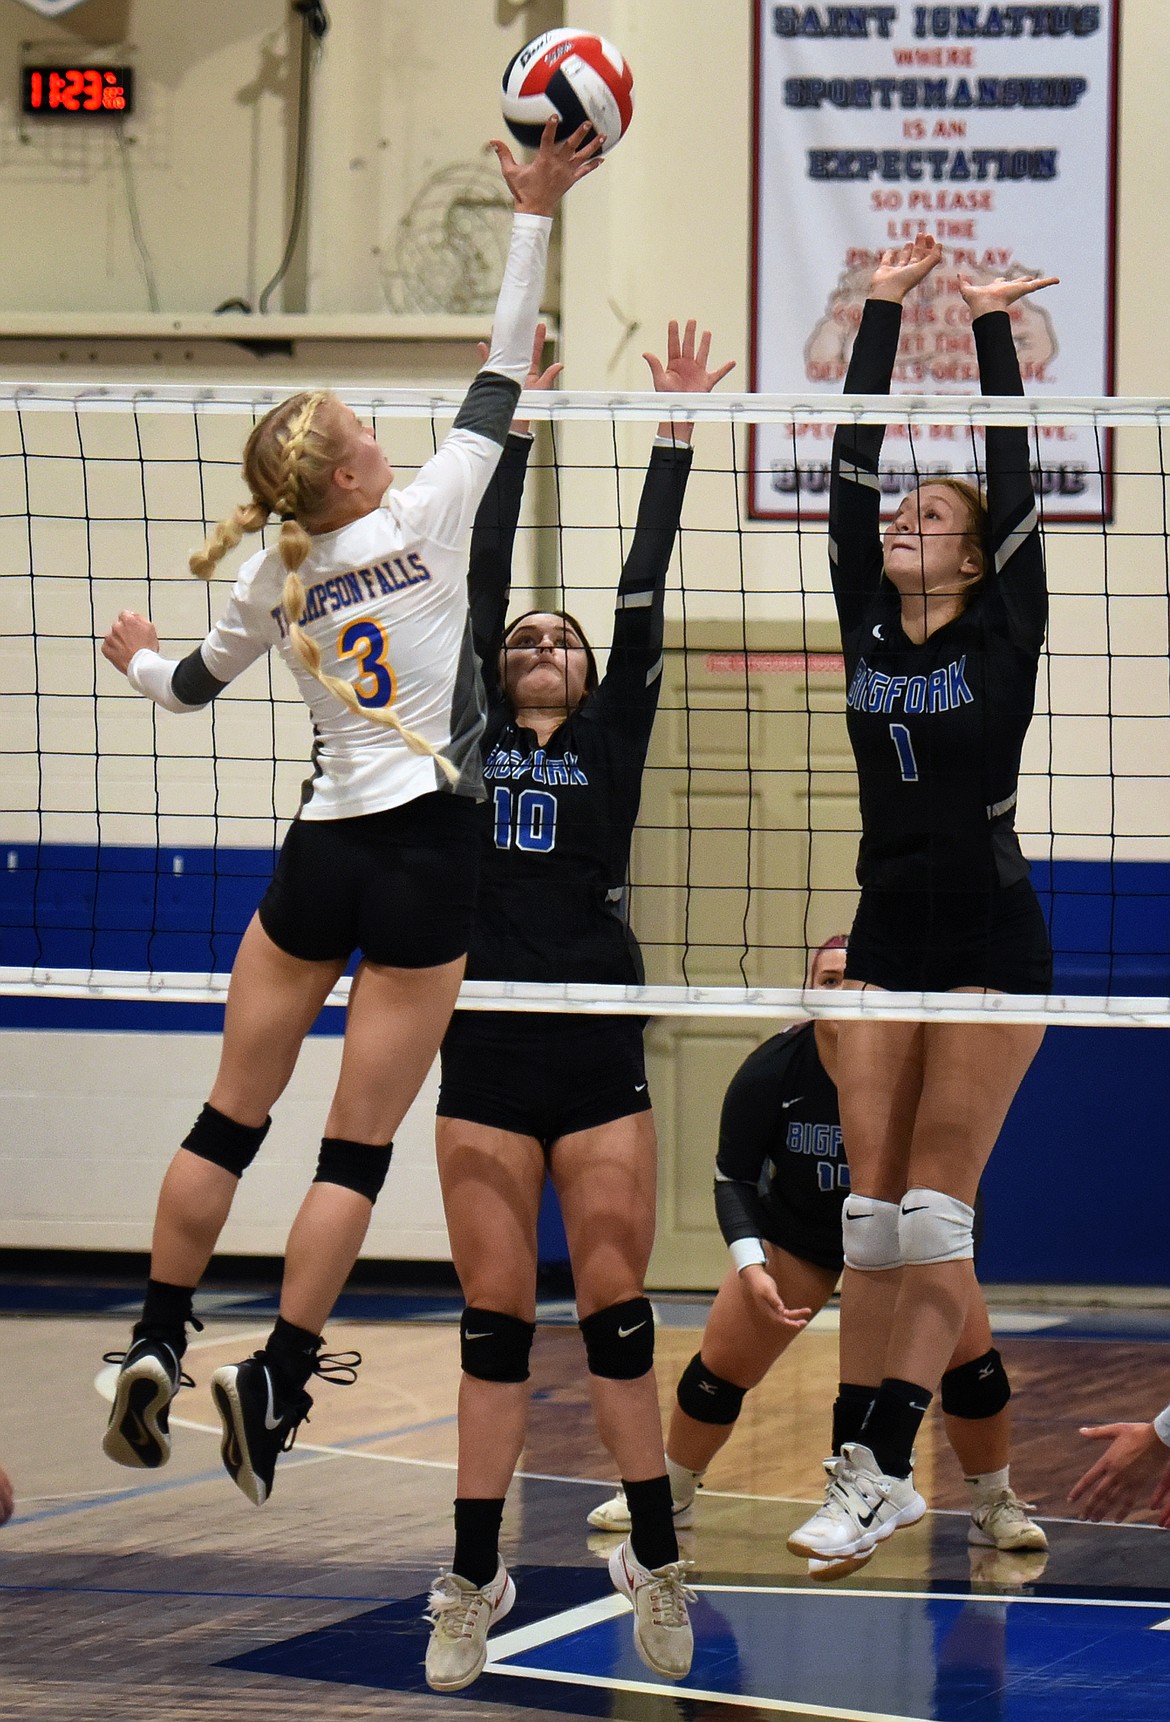 Scarlette Schwindt (3) of Thompson Falls goes high above the net to hit the ball past Bigfork defenders Arianna Saari (10) and Inga Turner (1) during action at the 7B District Volleyball Tournament in St. Ignatius Saturday.